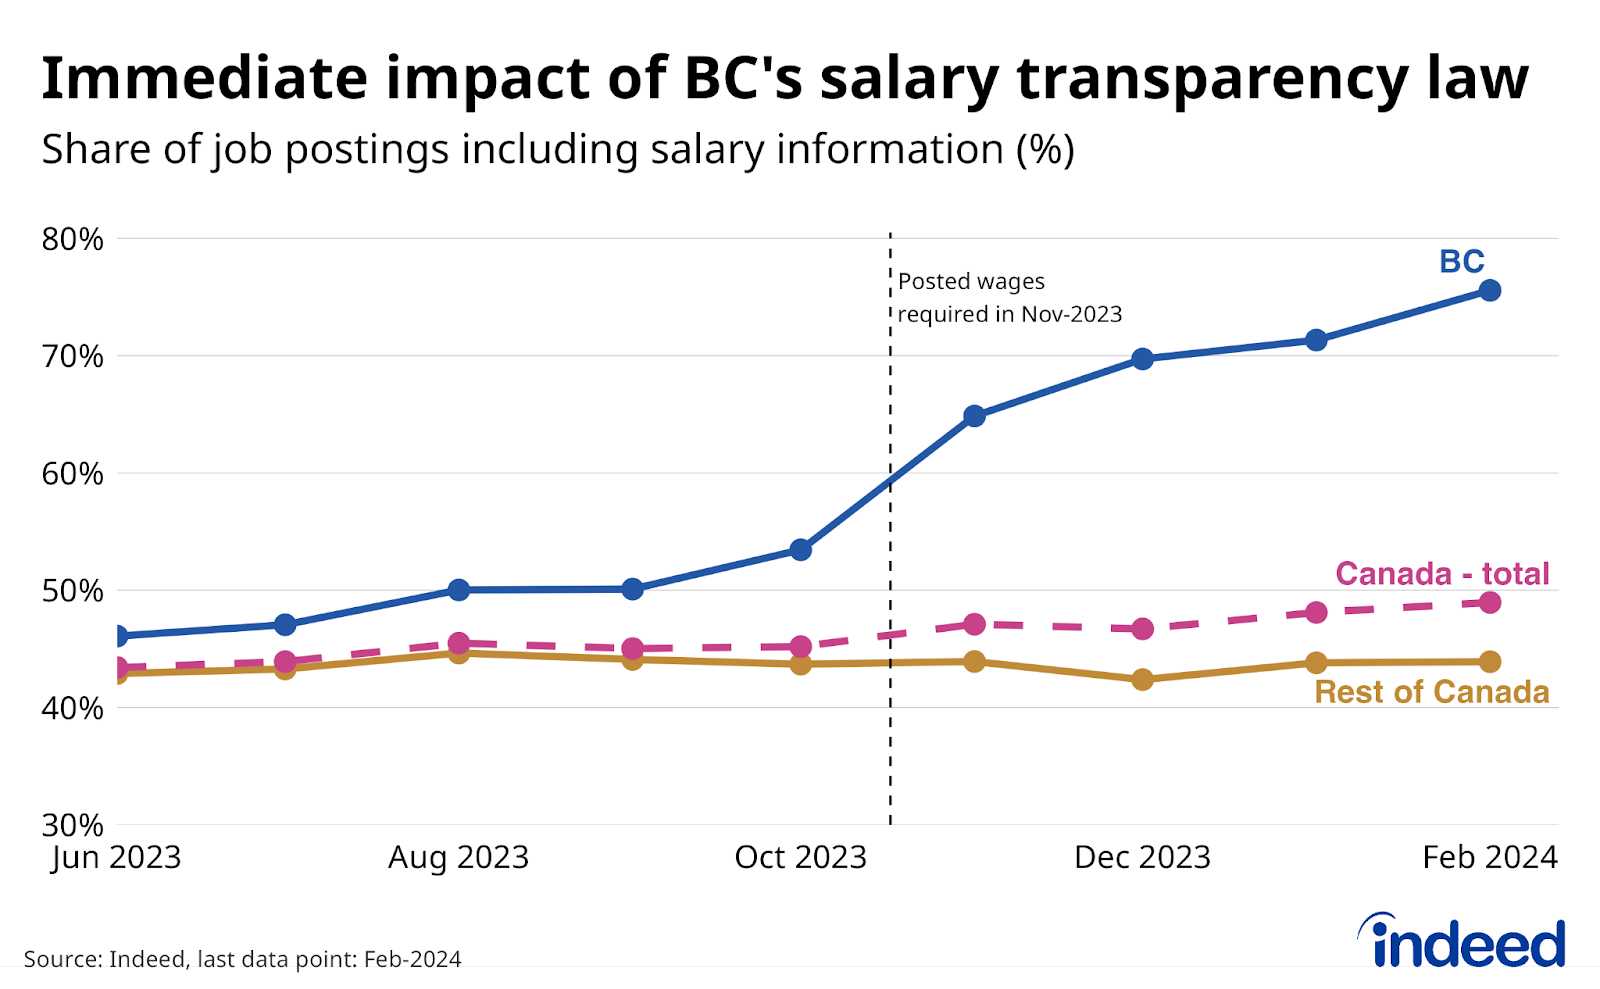 Line chart titled “Immediate impact of BC’s salary transparency law,” shows the share of job postings containing salary information in BC, the rest of Canada, and the Canada-wide average, between June 2023, and February 2024. The posted salary share in BC jumped from 49% in Q3 2023, to 76% as of February, following the new law in November 2023. 